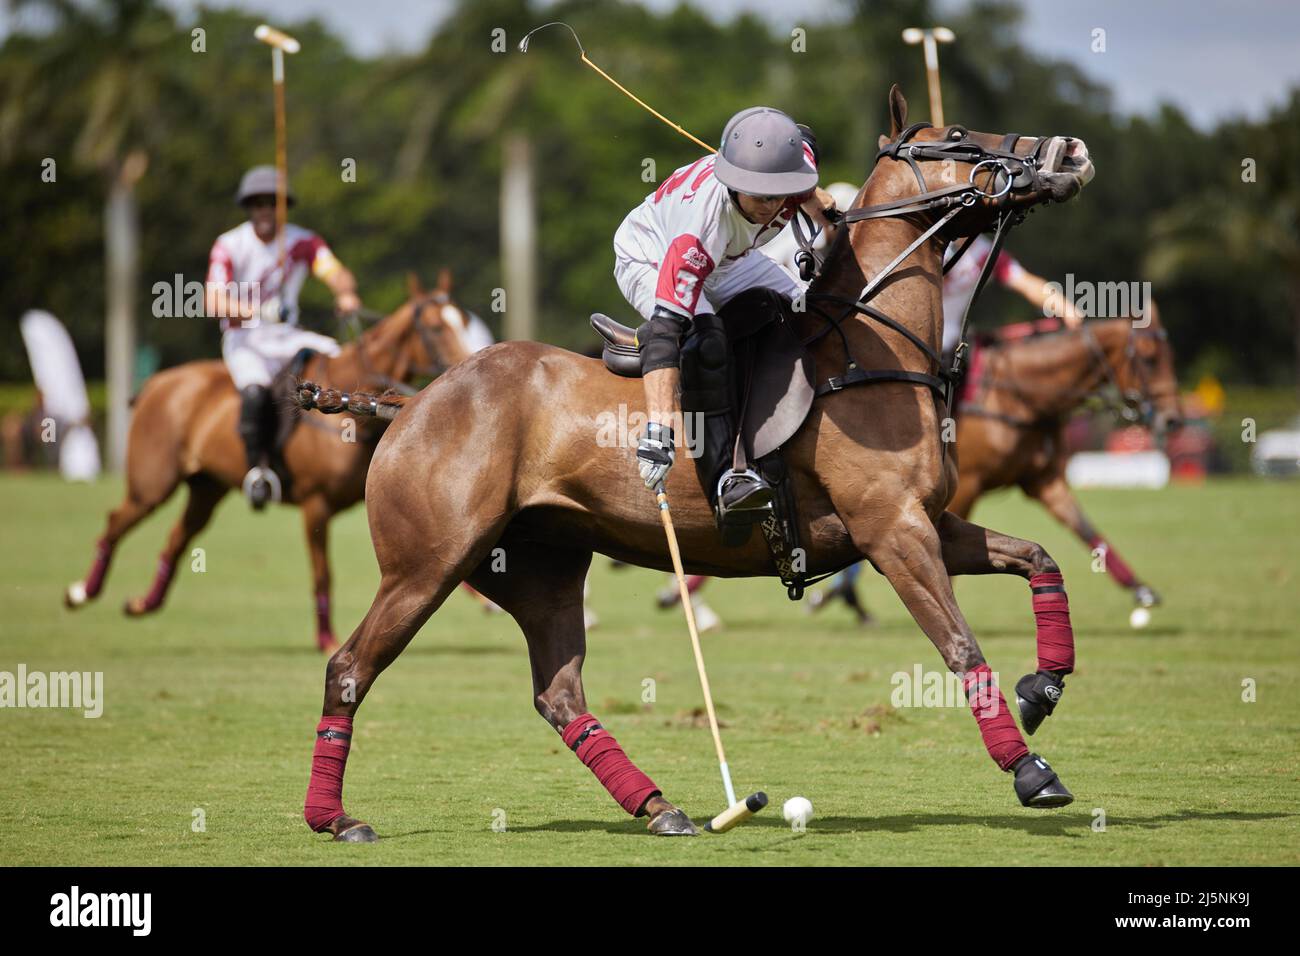 Wellington, United States. 24th Apr, 2022. 3 Matias Torres Zavaleta from  Pilot Polo seen in action during U.S. Open Polo Championship 2022, Final at  The International Polo Club Palm Beach, Florida. Final